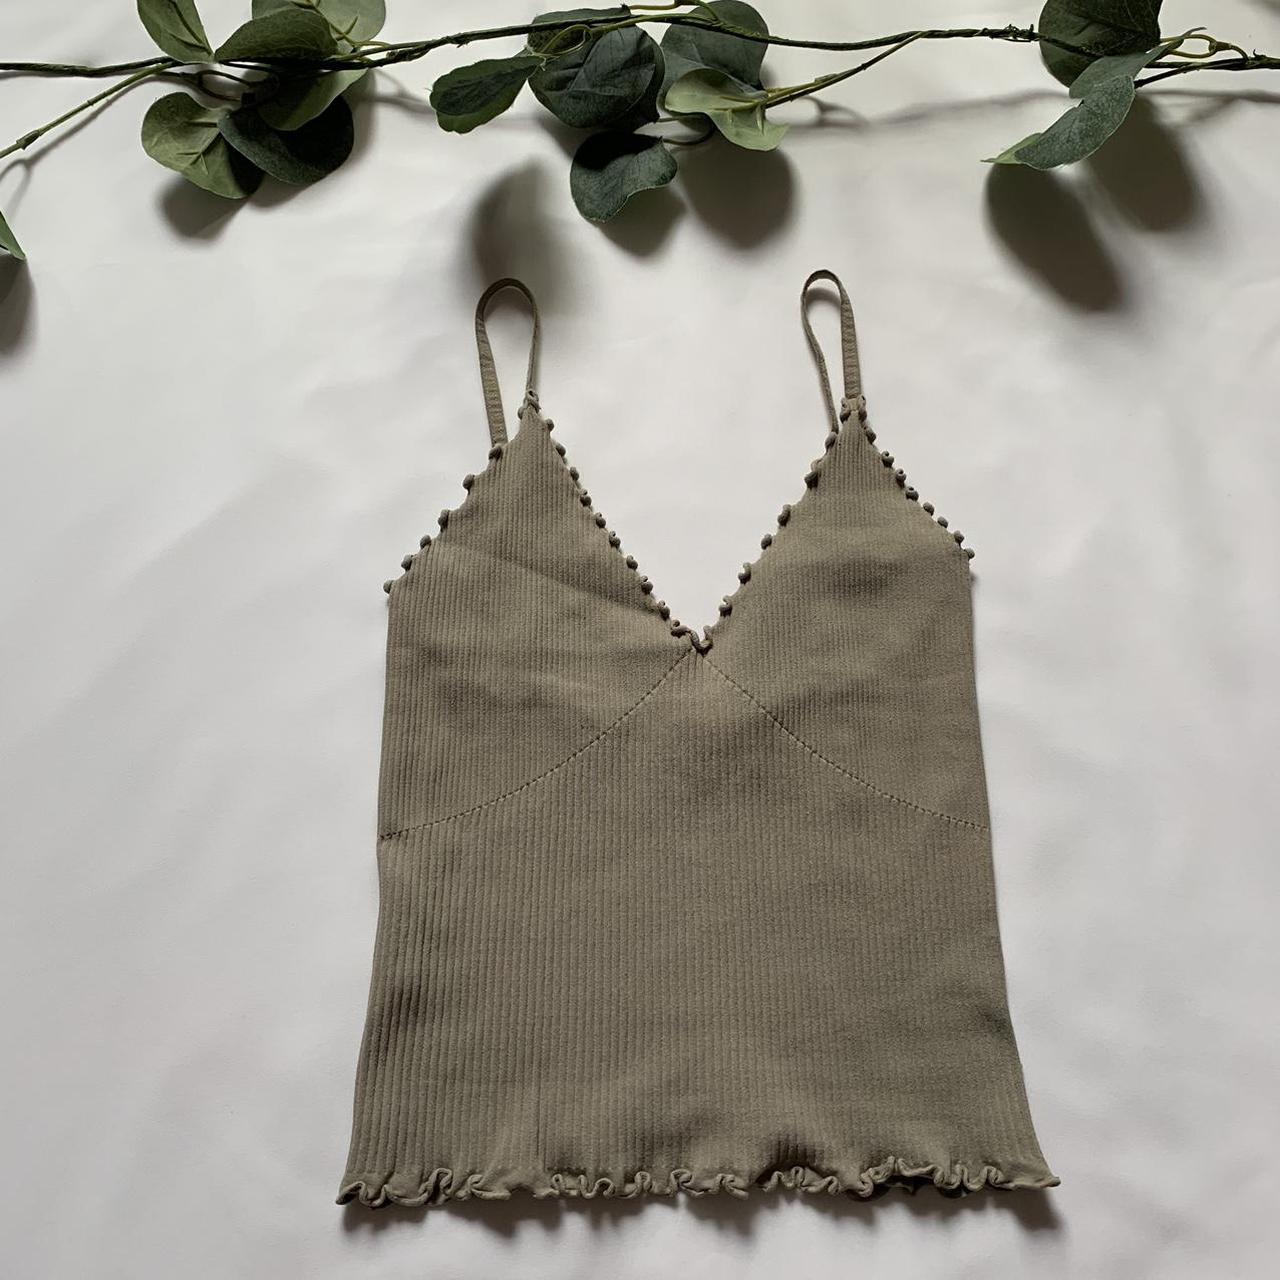 𓆩♡𓆪 - olive green ribbed cami top - brand is Free... - Depop